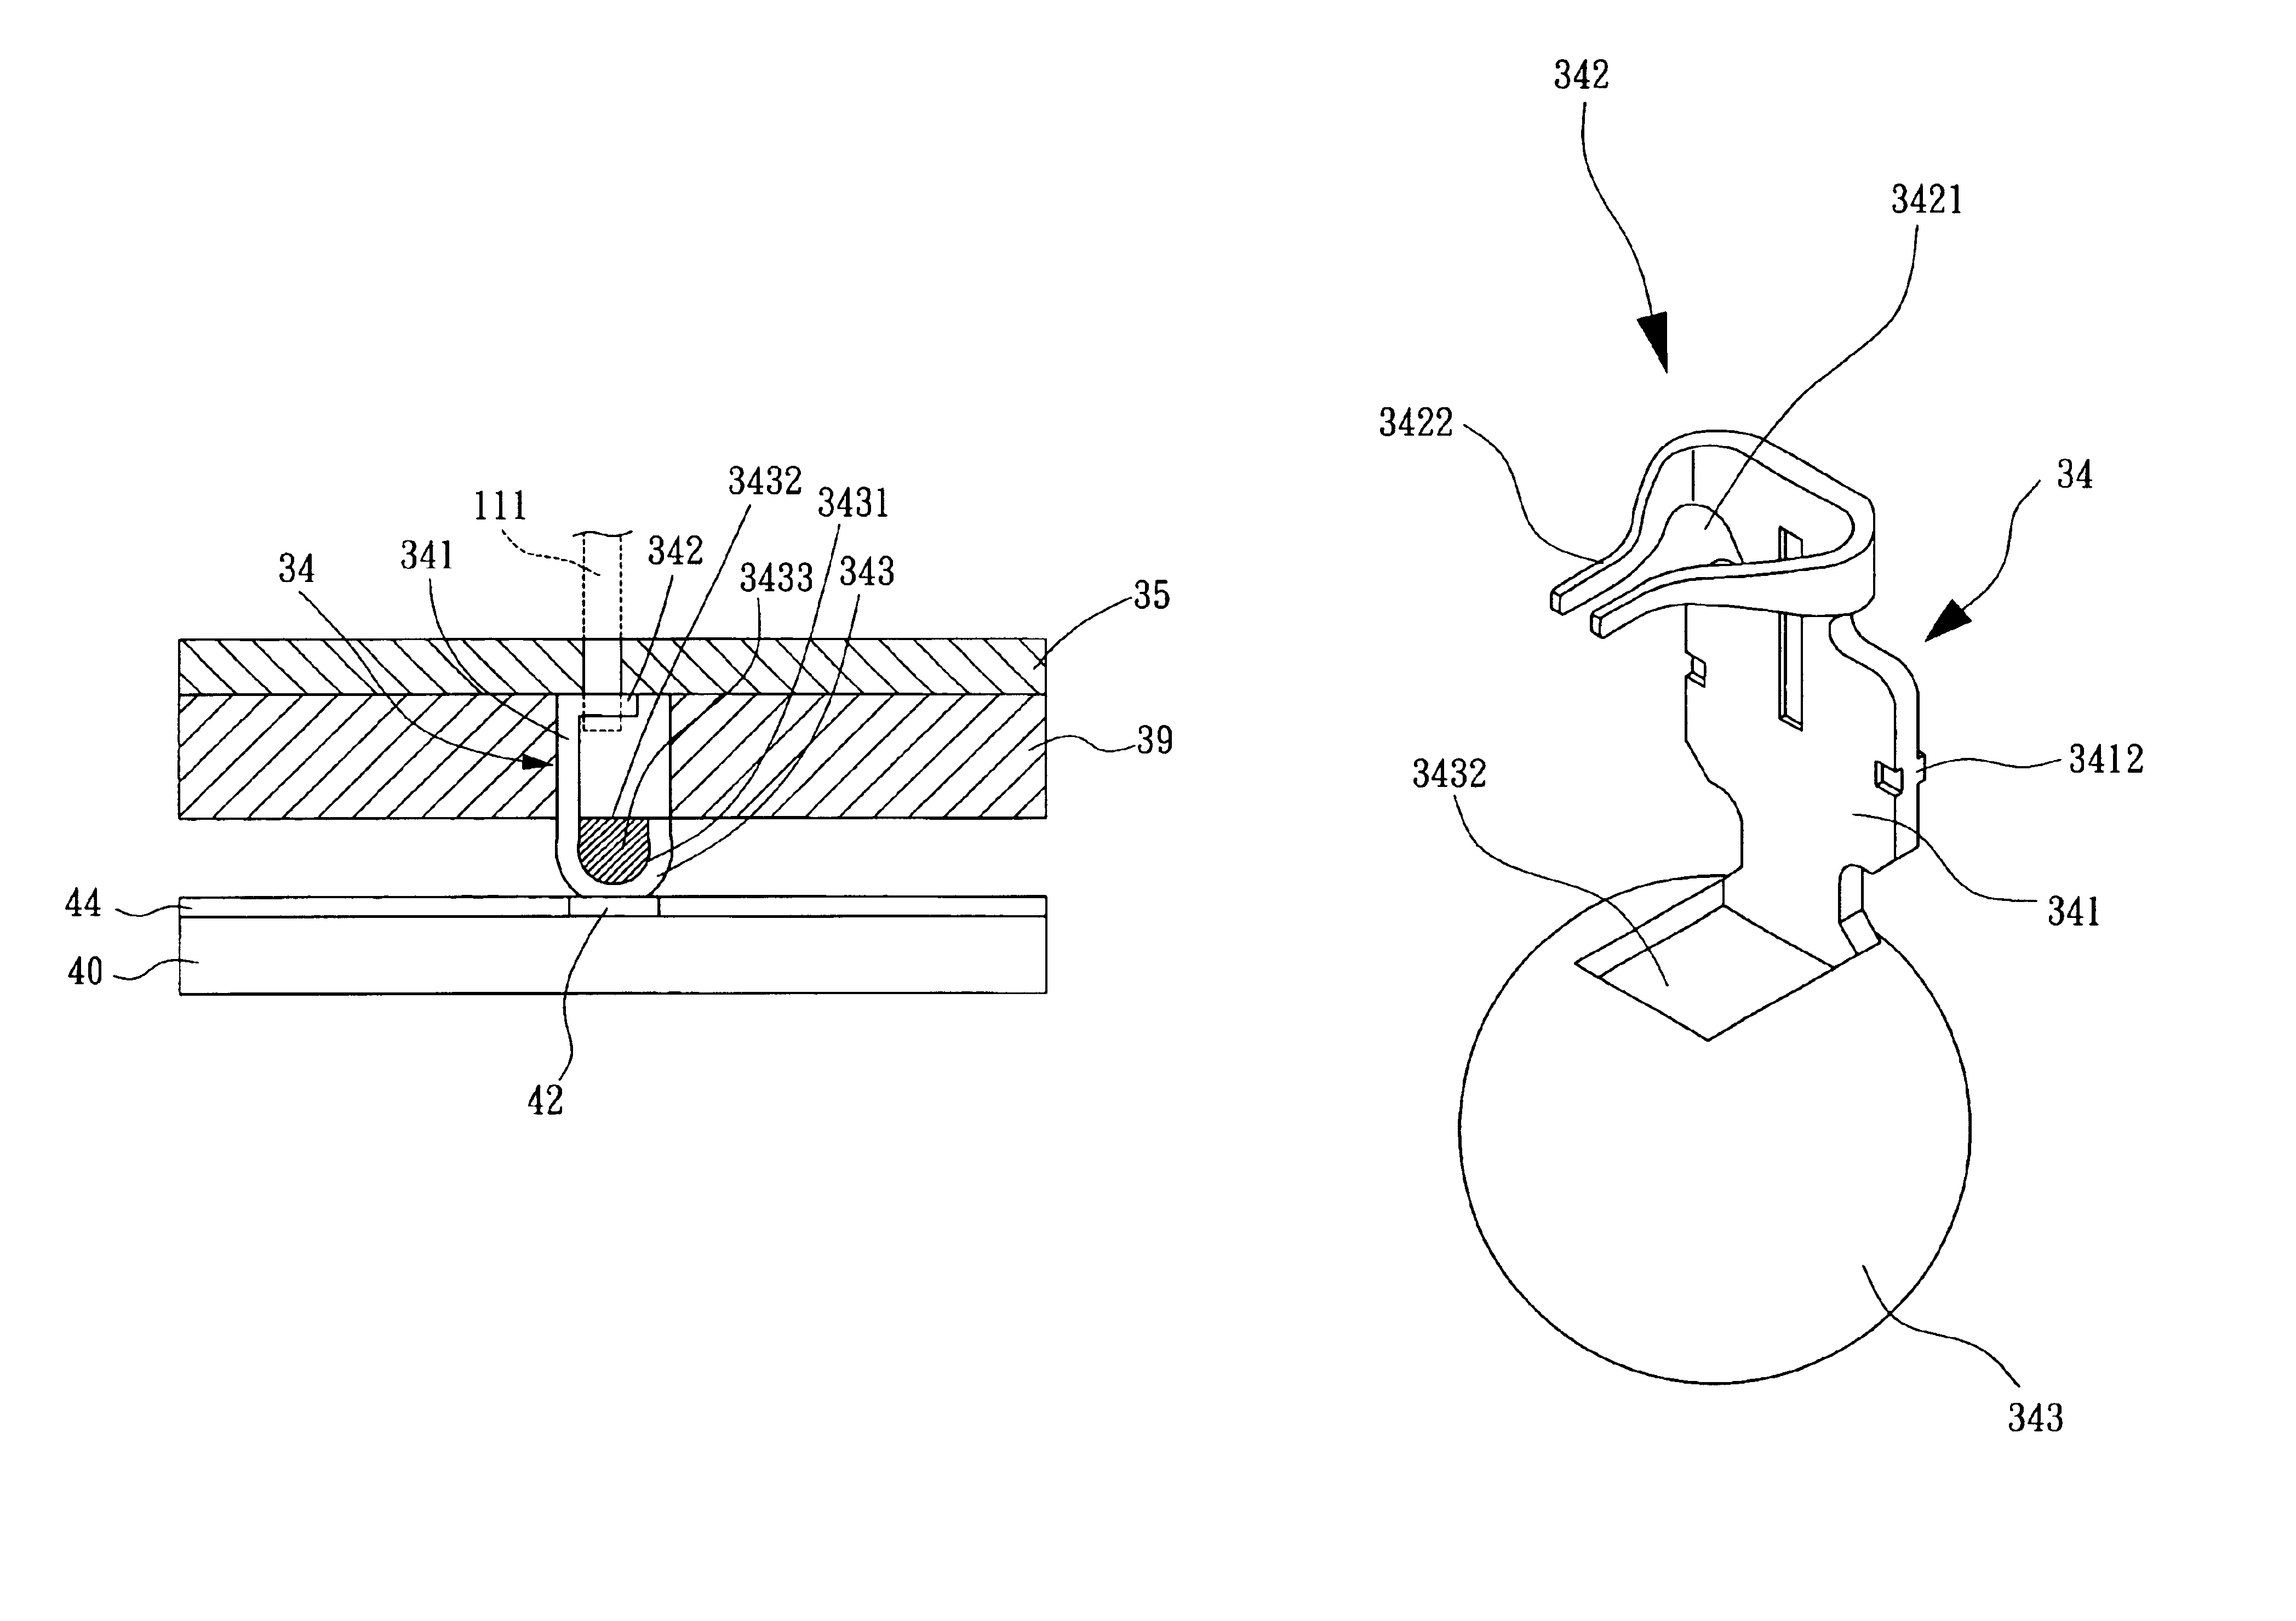 Electrical connection device between a pin-typed IC package and a circuit board